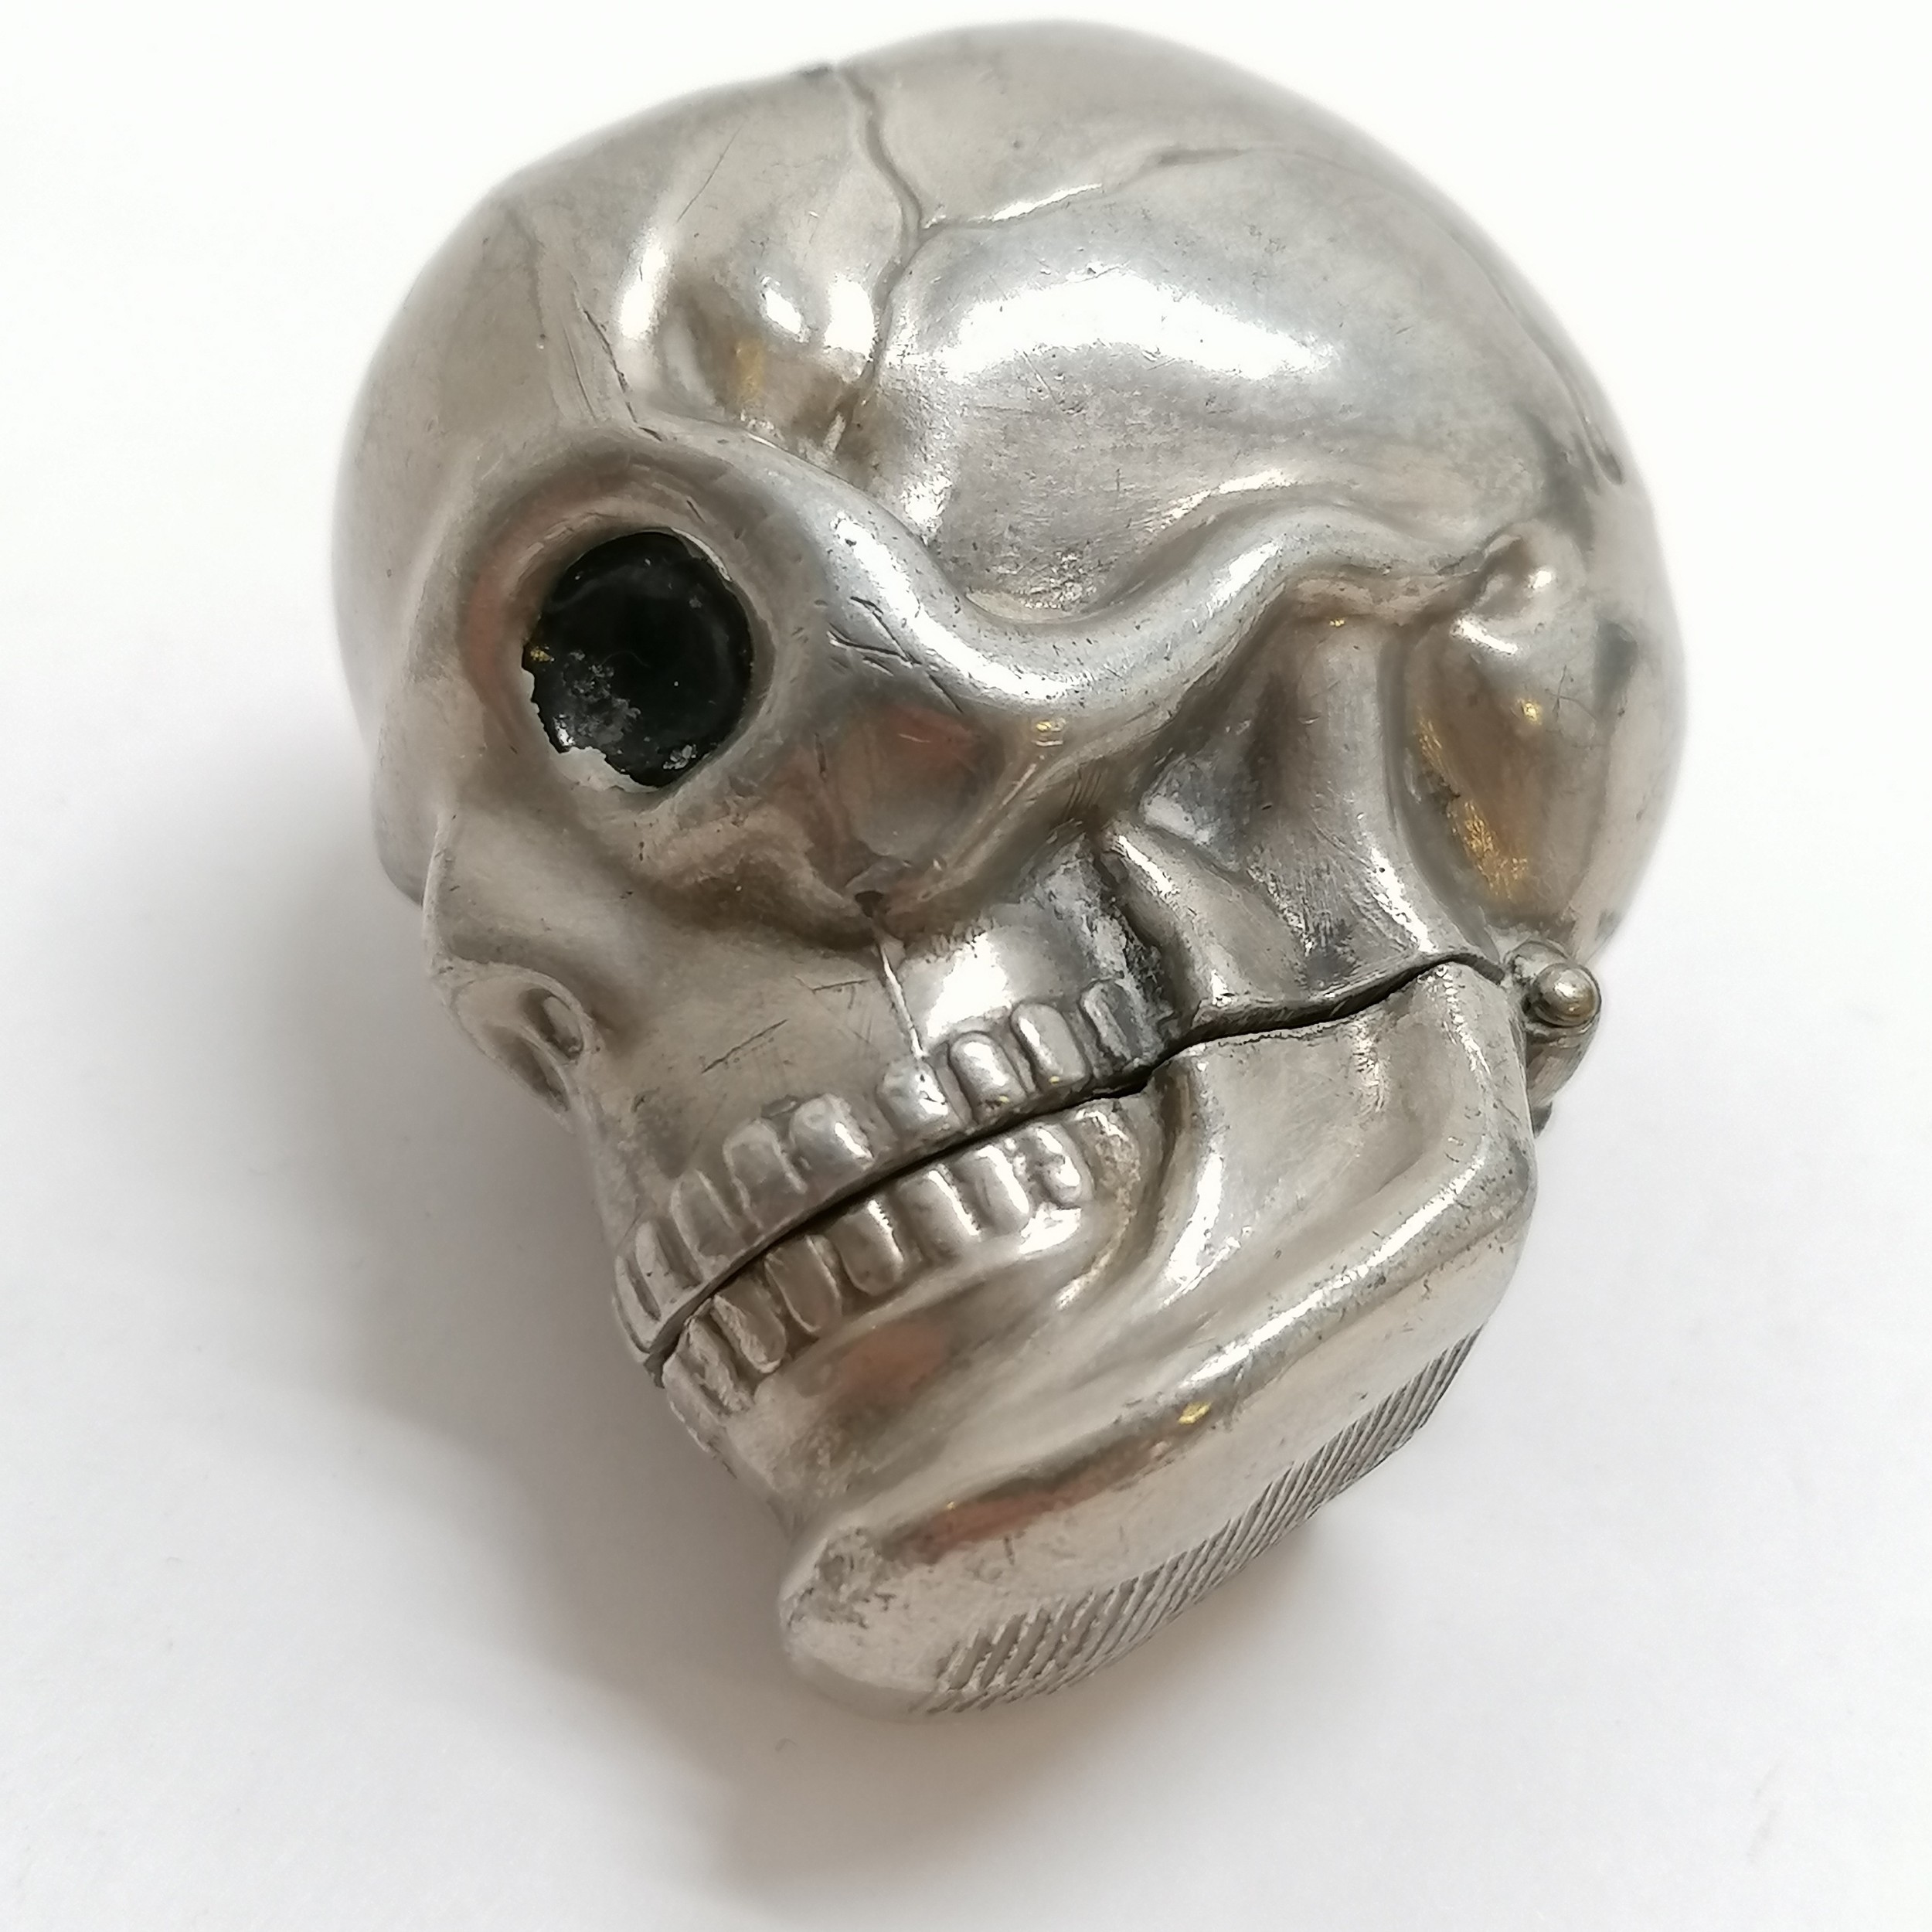 Novelty white metal vesta/match safe skull 5cm high Condition reportIn good used condition. Eye - Image 4 of 4